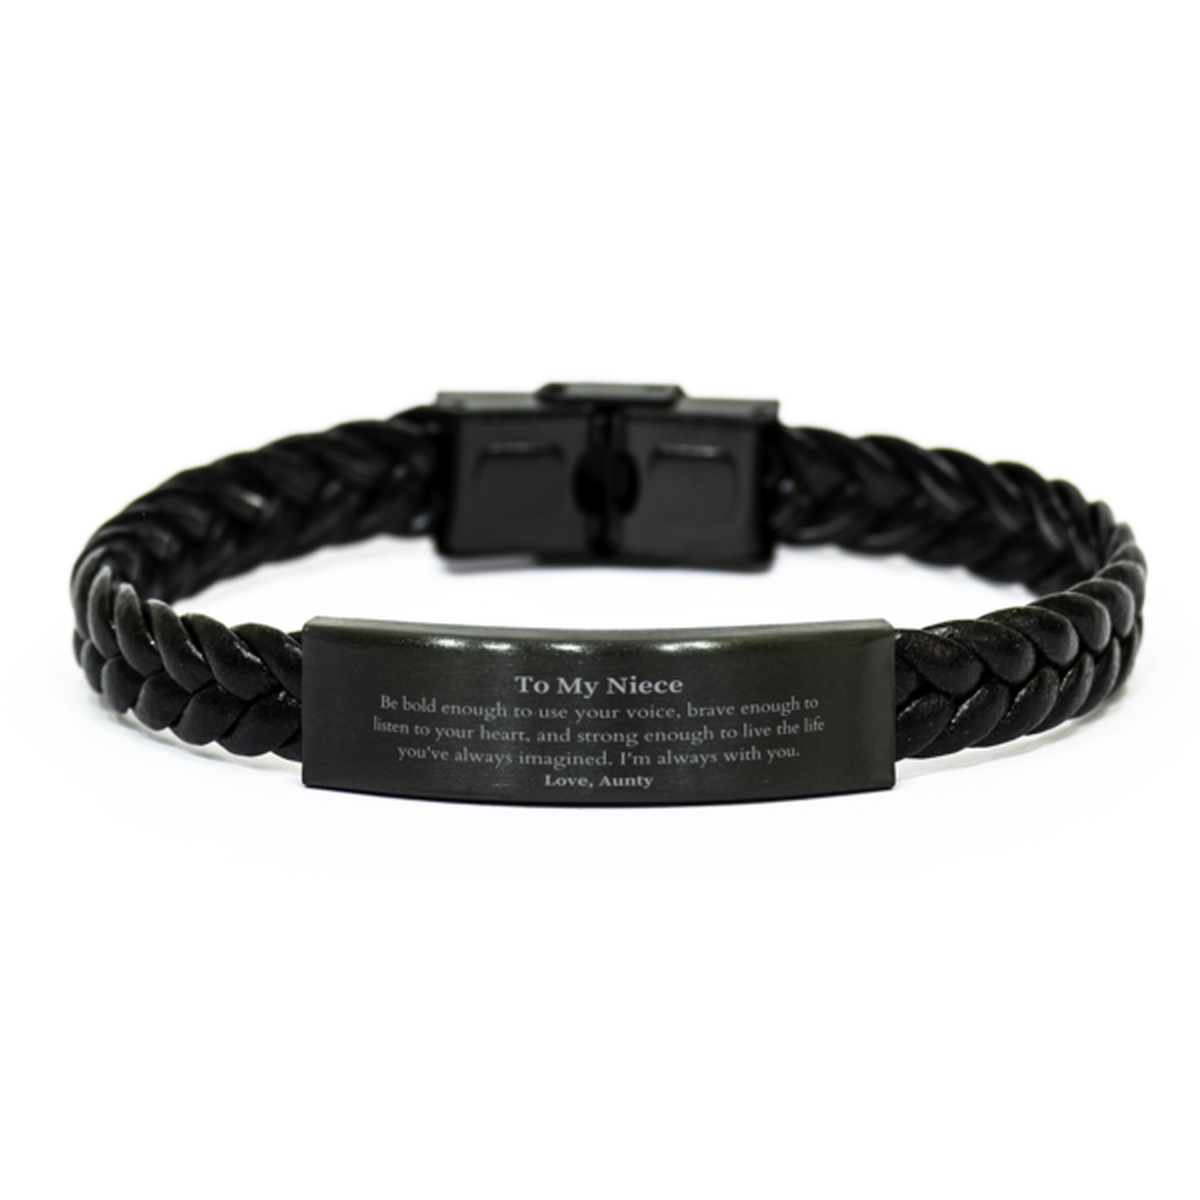 Keepsake Niece Braided Leather Bracelet Gift Idea Graduation Christmas Birthday Niece from Aunty, Niece Be bold enough to use your voice, brave enough to listen to your heart. Love, Aunty